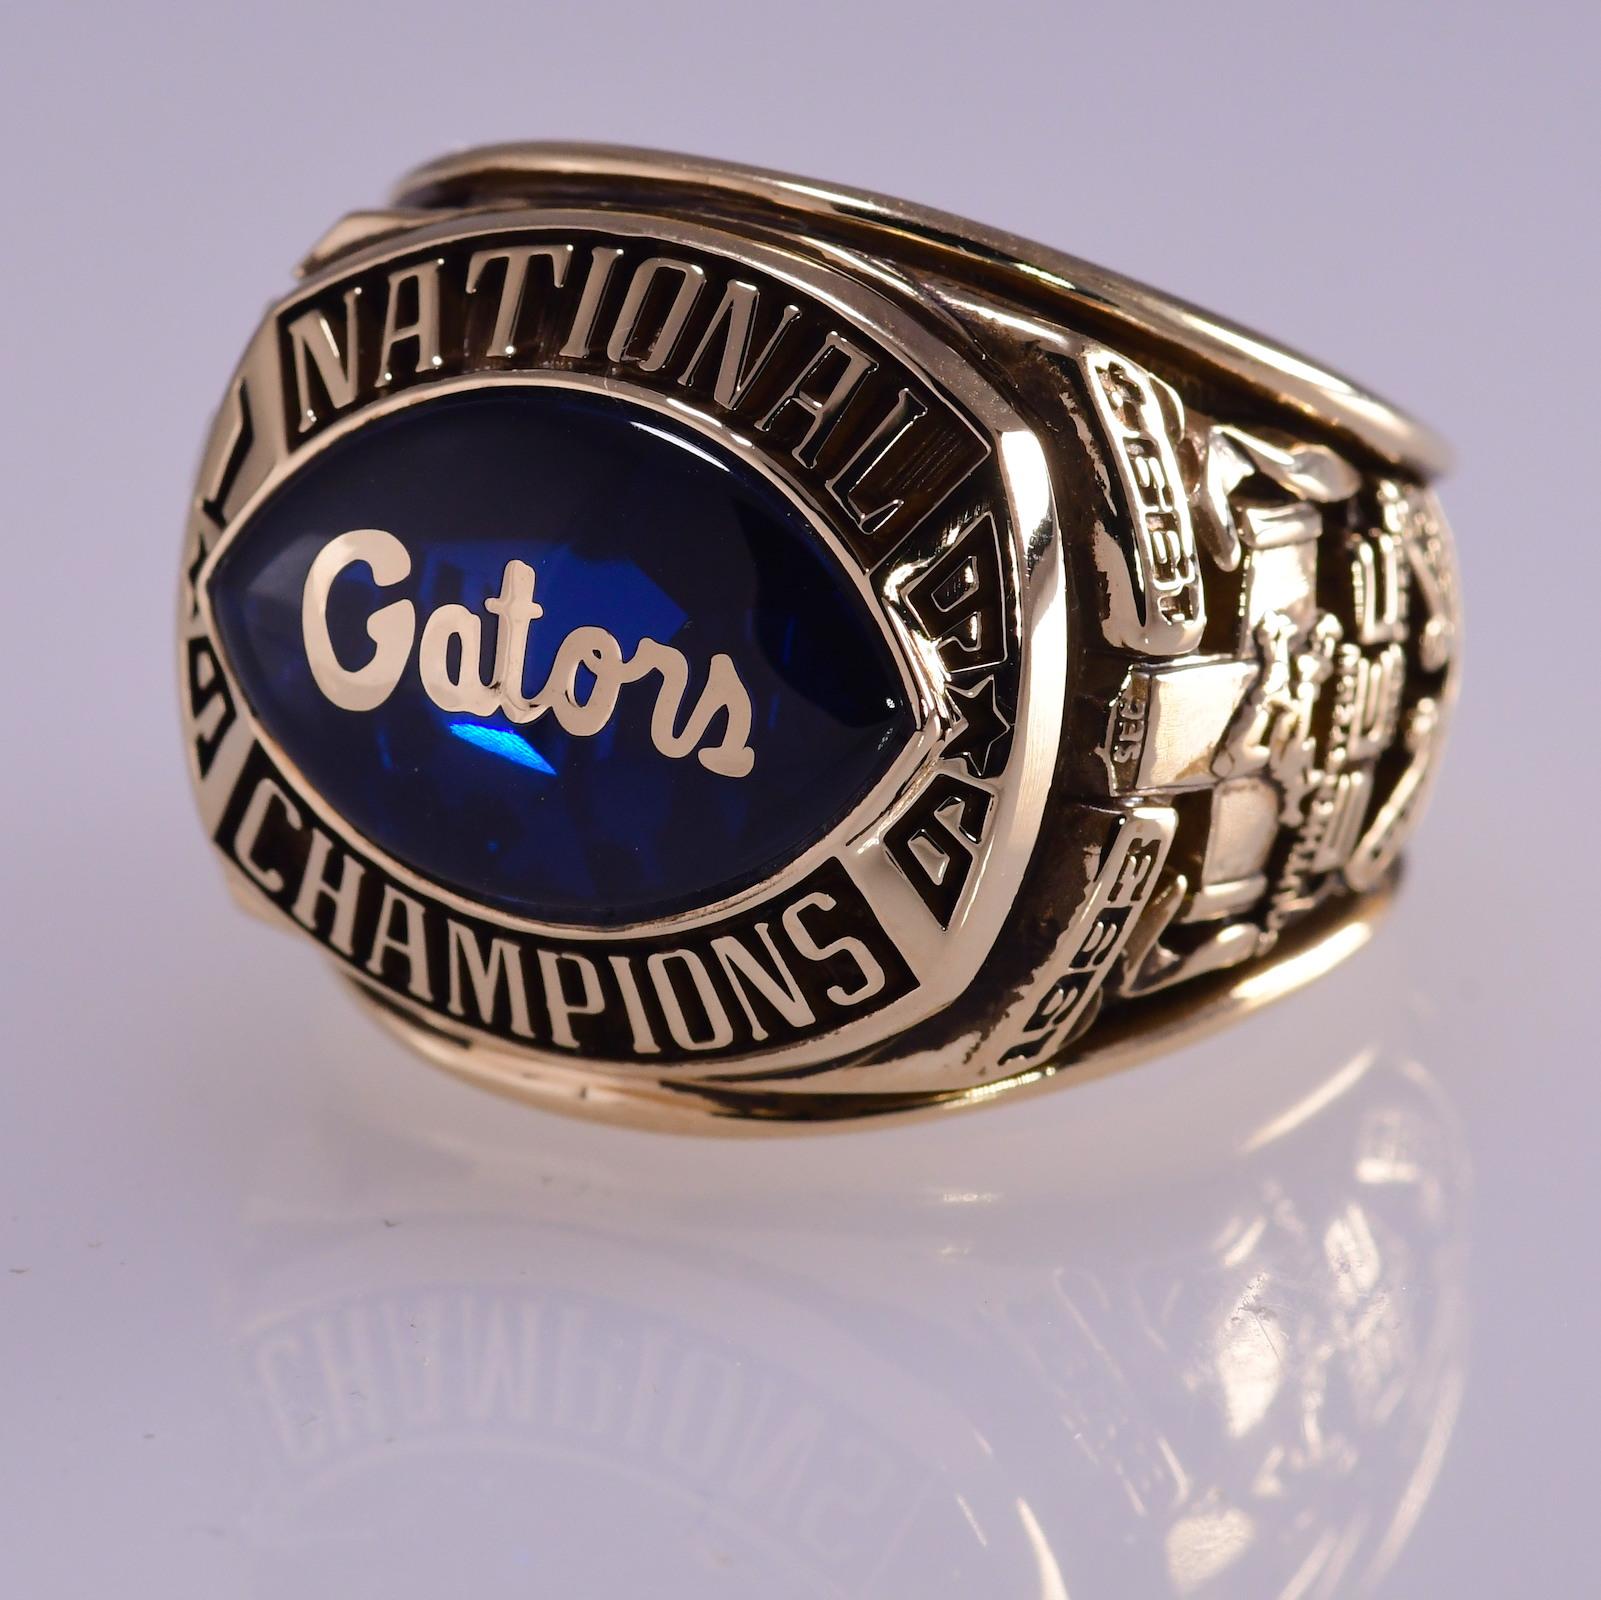 Florida Gators National Football Champions Ring  (non player) Yellow Gold 10K 37.50 grams Artcarved 
Excellent Condition
Finger Size 13 
Purity: 10 Karat Yellow Gold 
Total Gram Weight: 37.50 grams
Note: Lightly Engraved Inside 